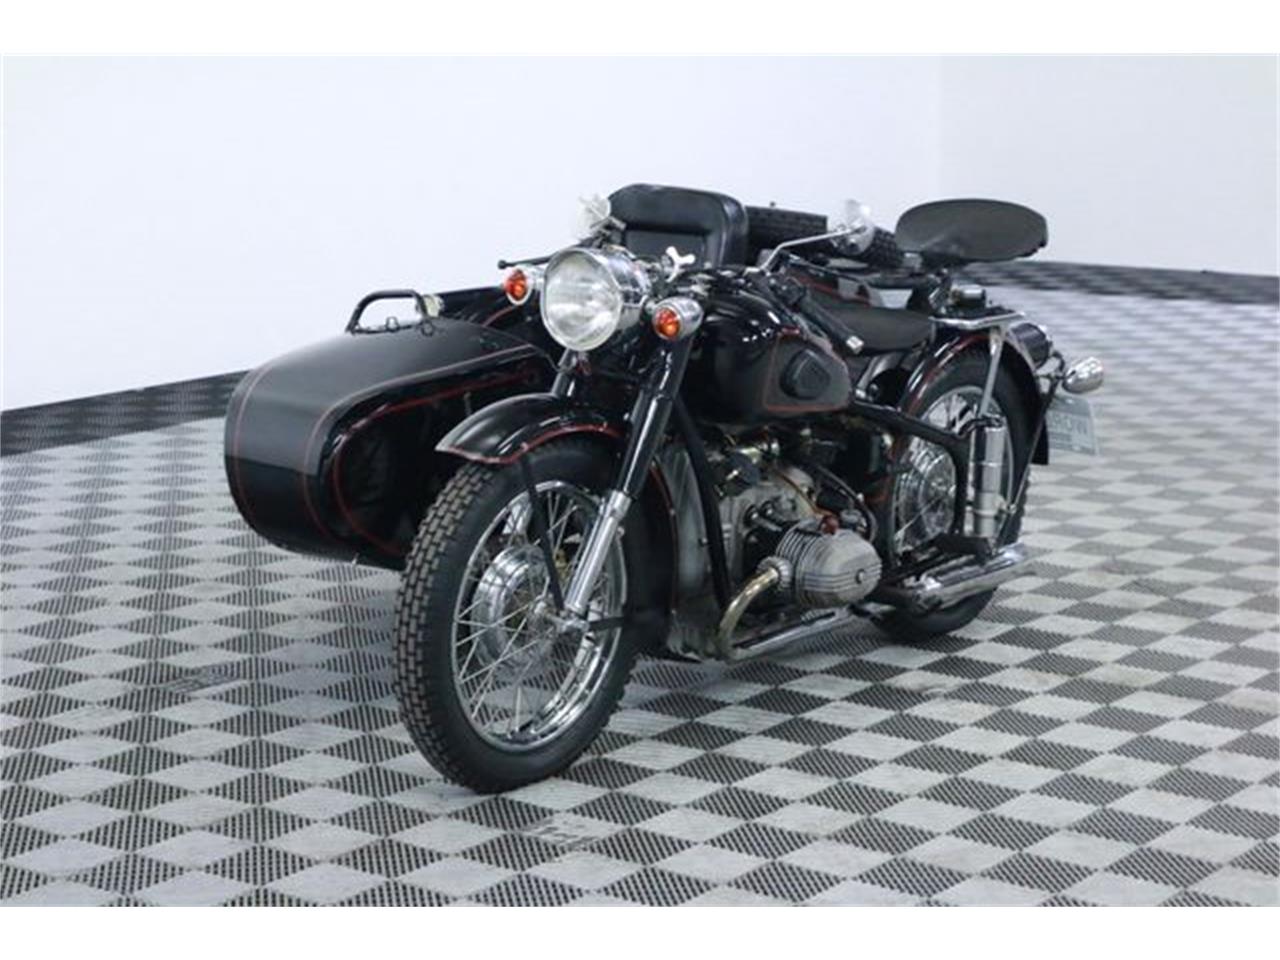 1973 BMW Motorcycle for Sale | ClassicCars.com | CC-1022400